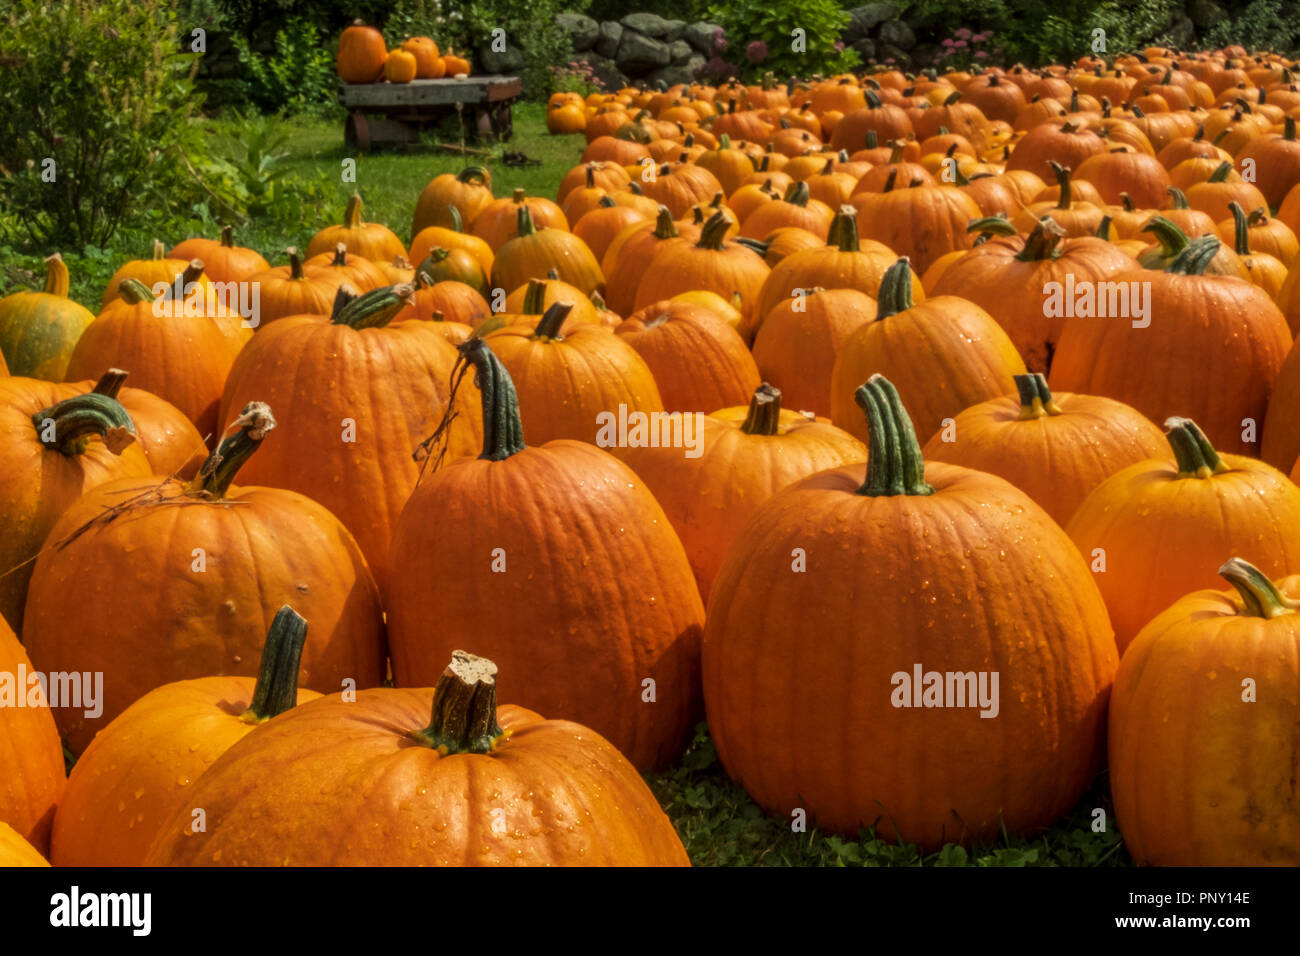 Farm stand in the fall selling pumpkins Stock Photo